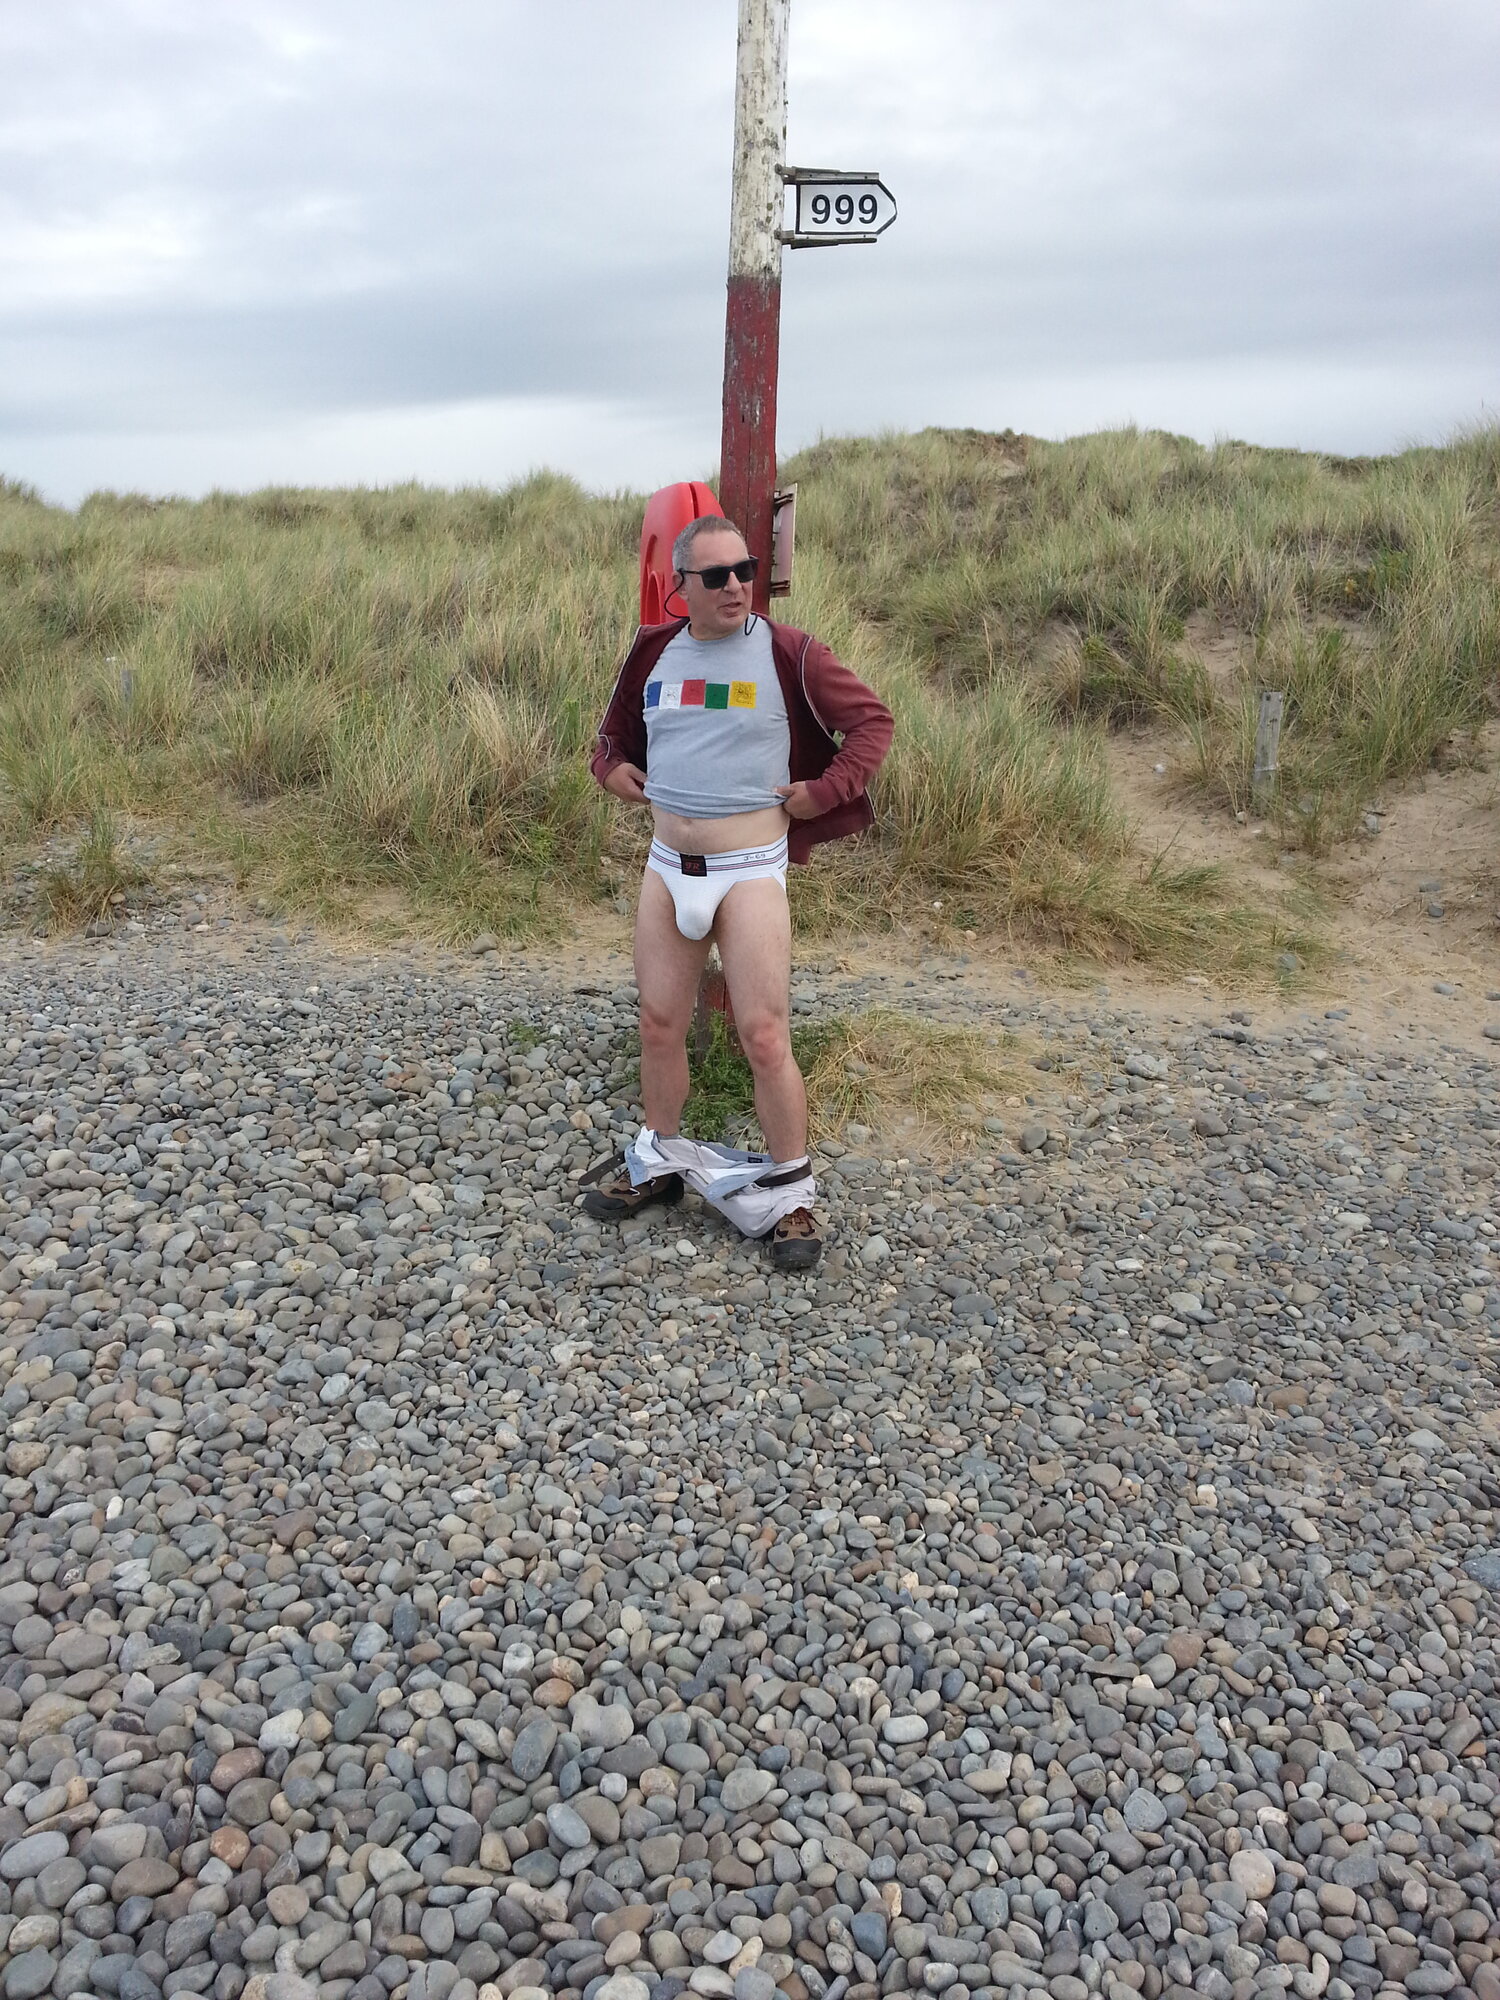 Standing against the emergency 999 signpost wearing white F&R #2 jockstrap